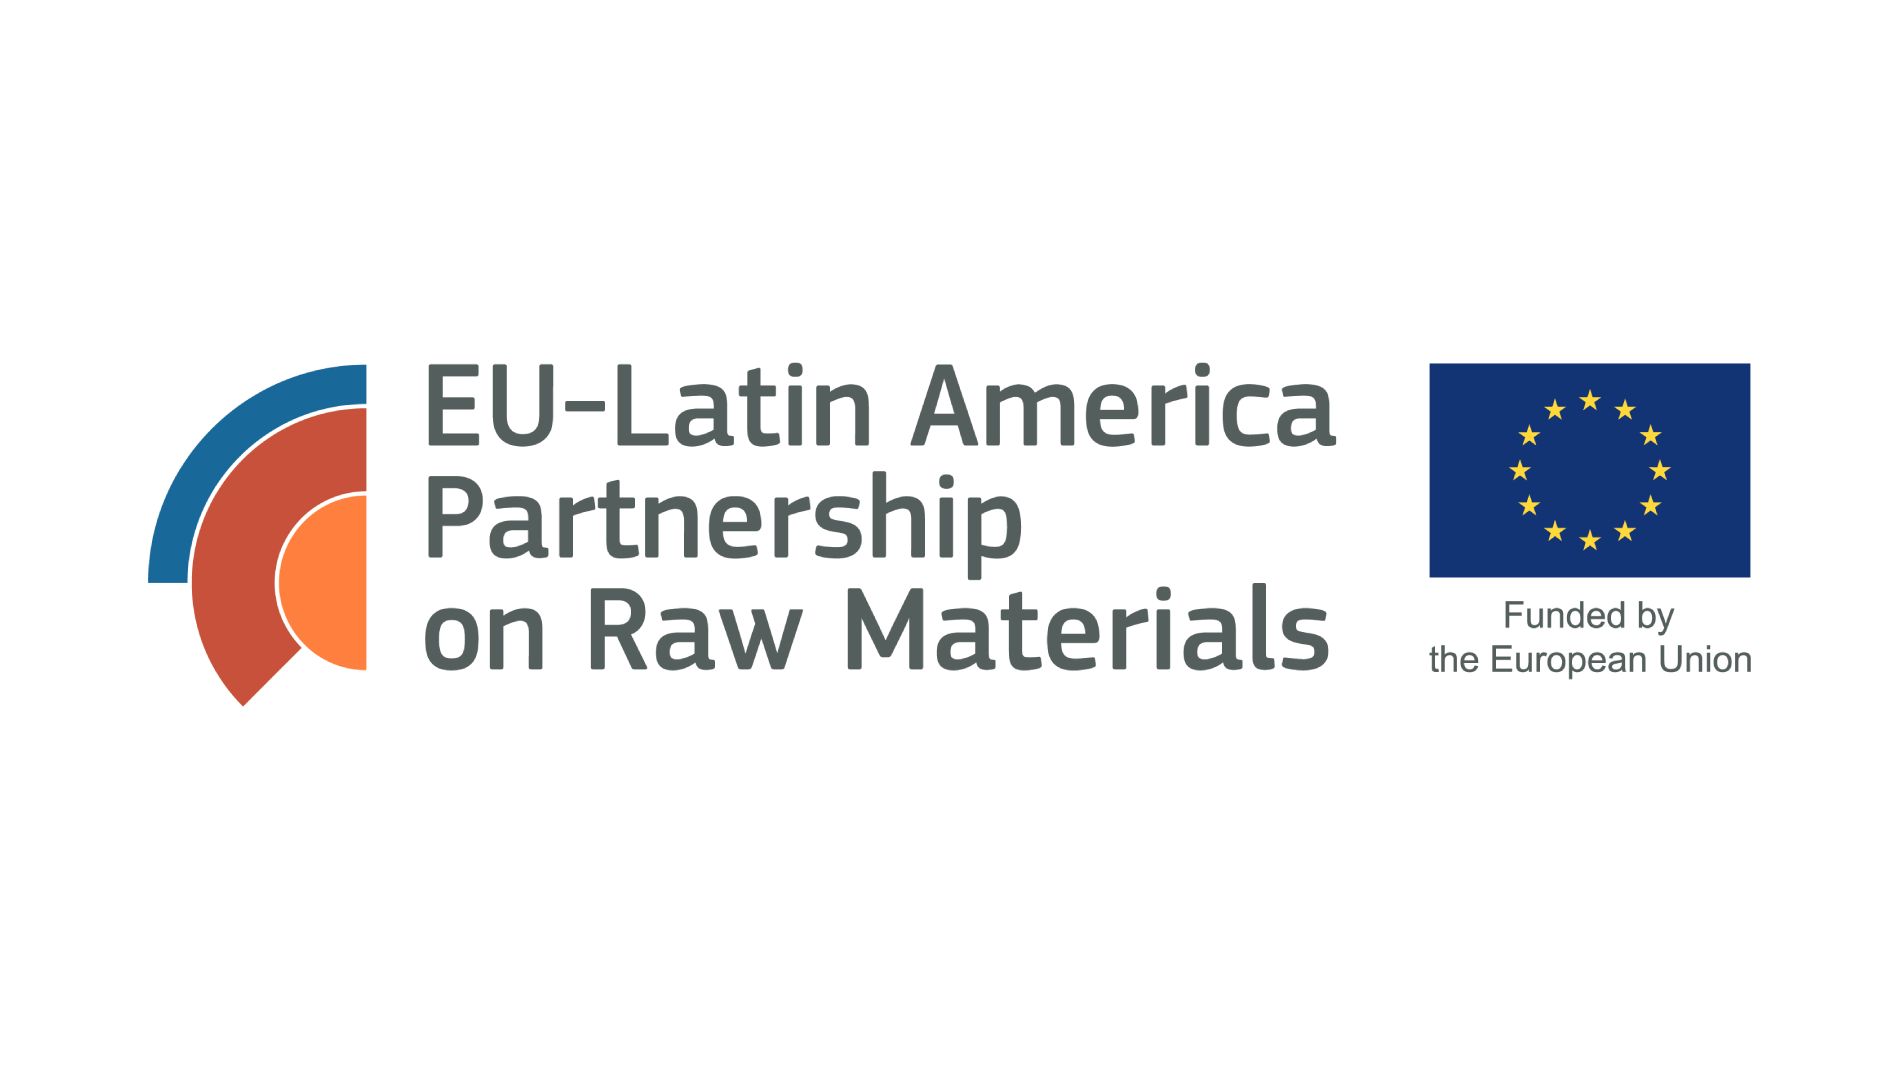 Promoting investments between the European Union and Latin America in sustainable value chains of raw materials.